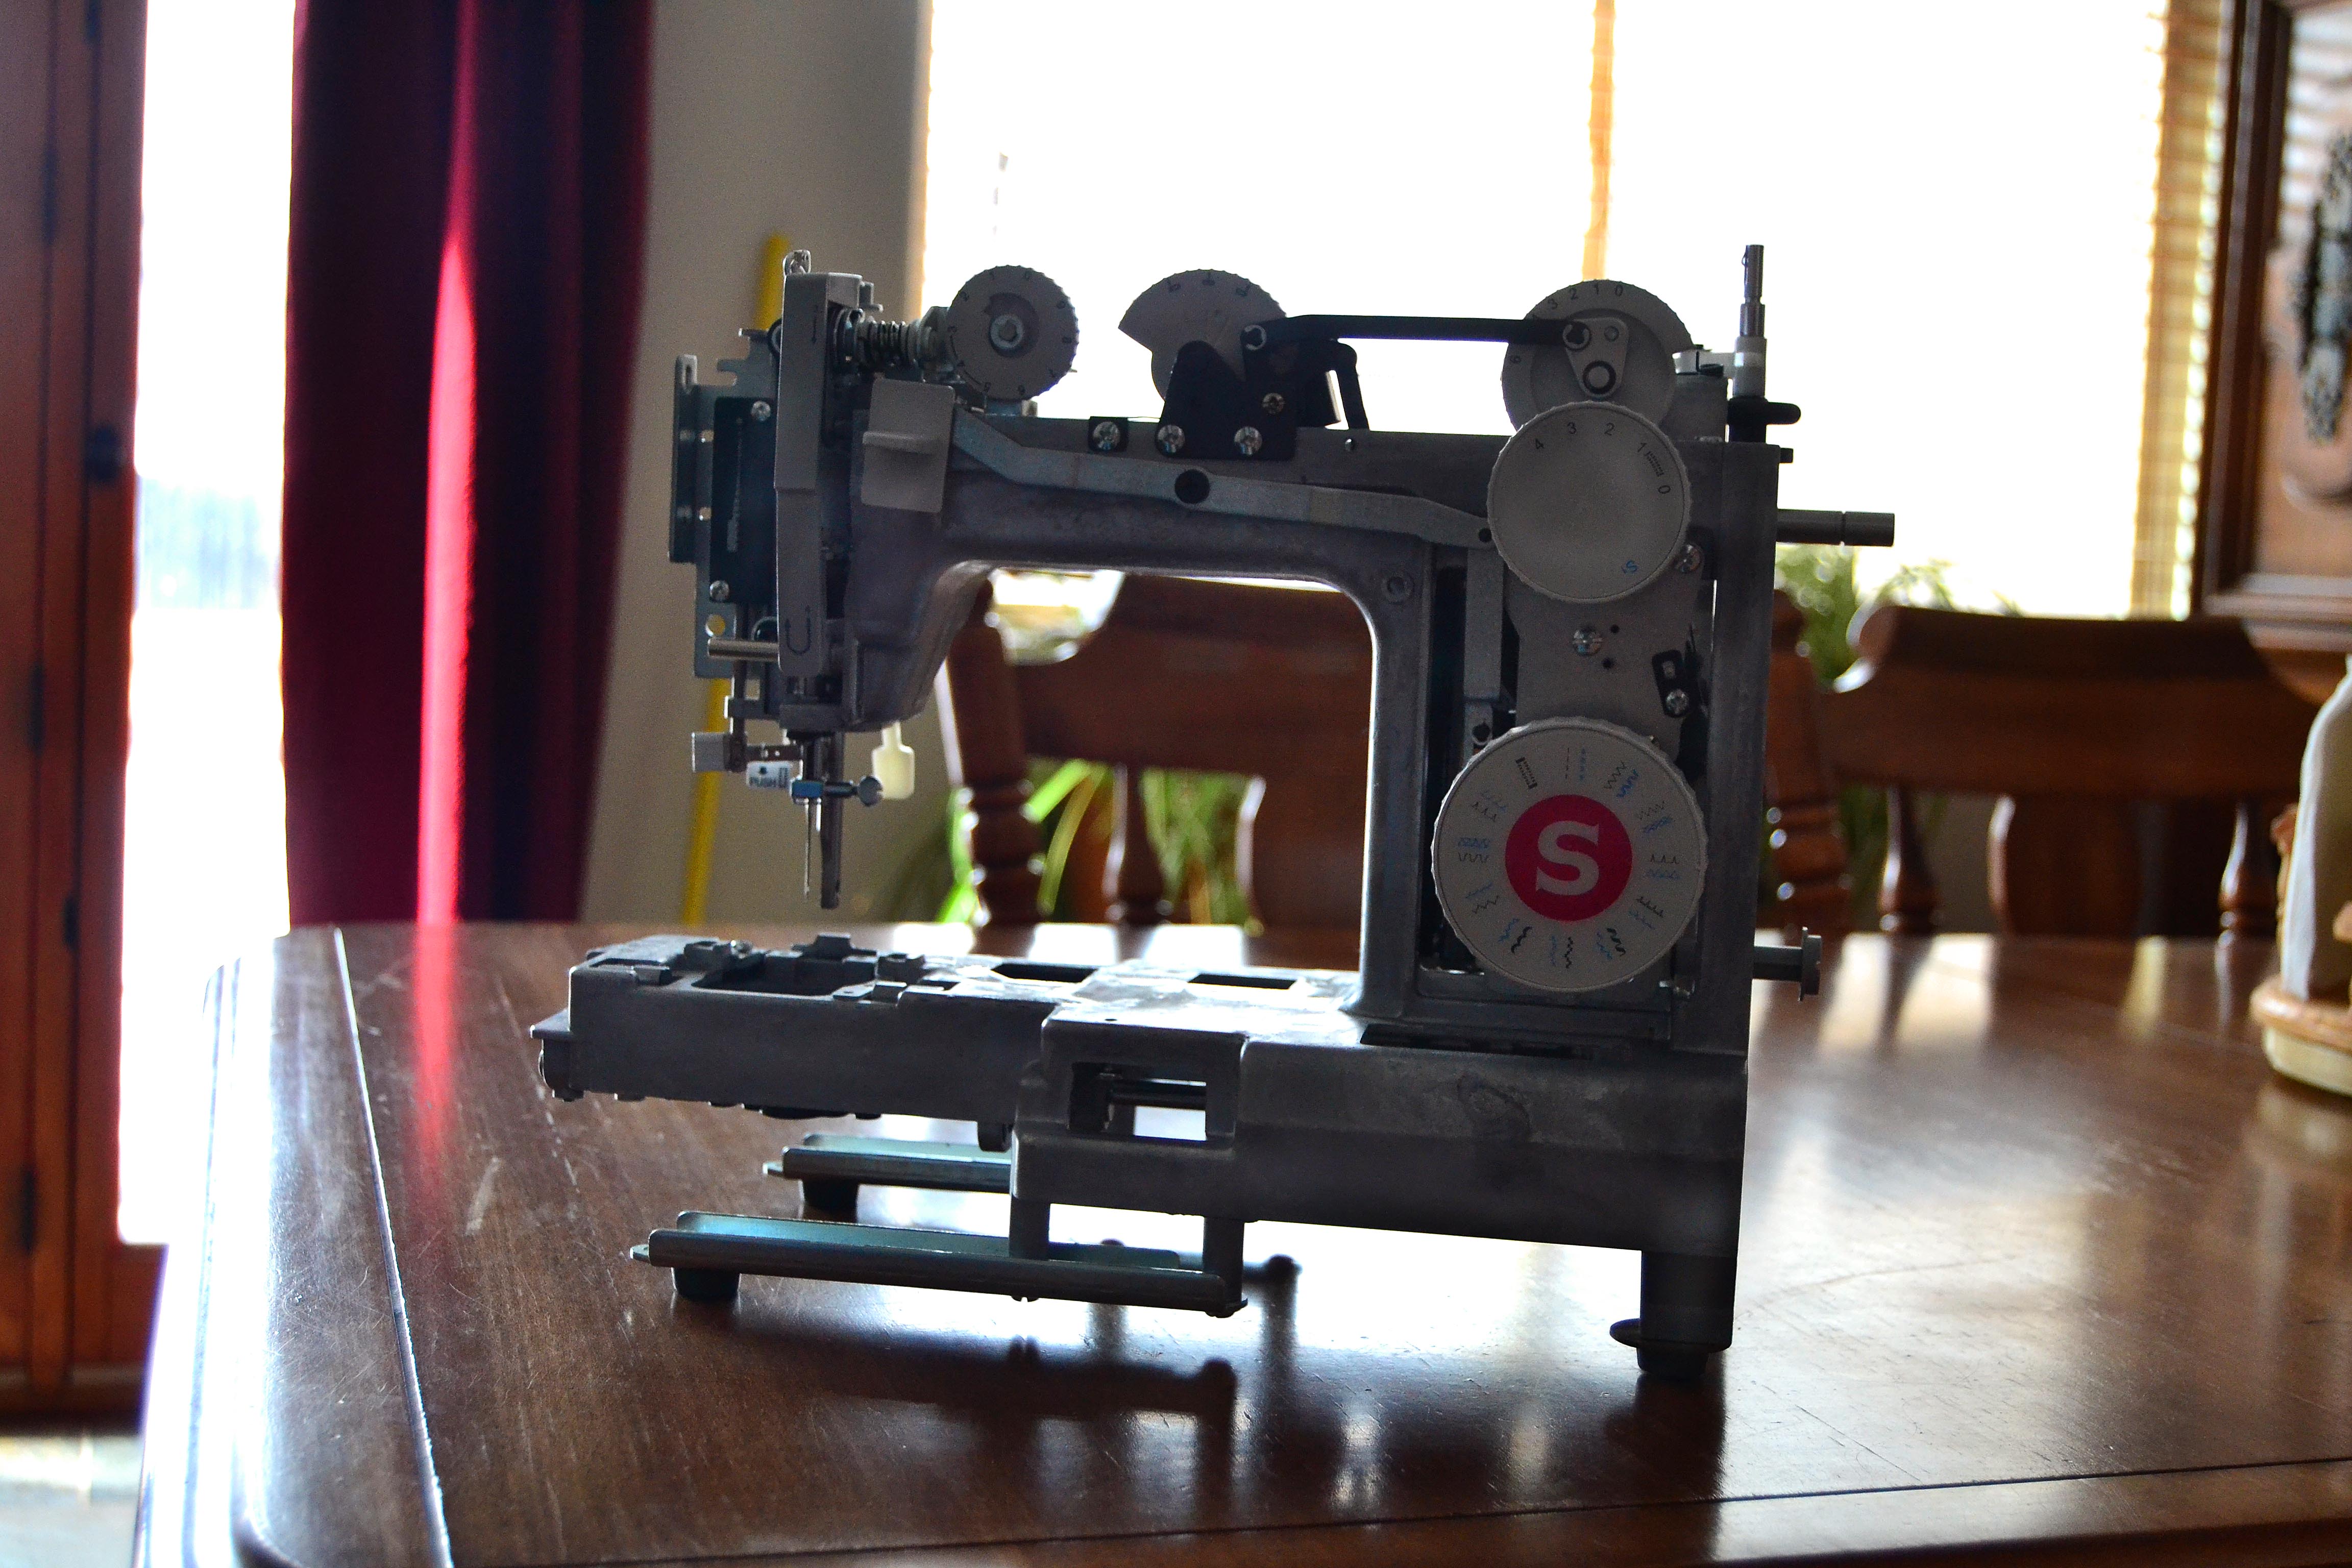 A sewing machine that's been stripped down to it's metal frame on a kitchen table in front of a window